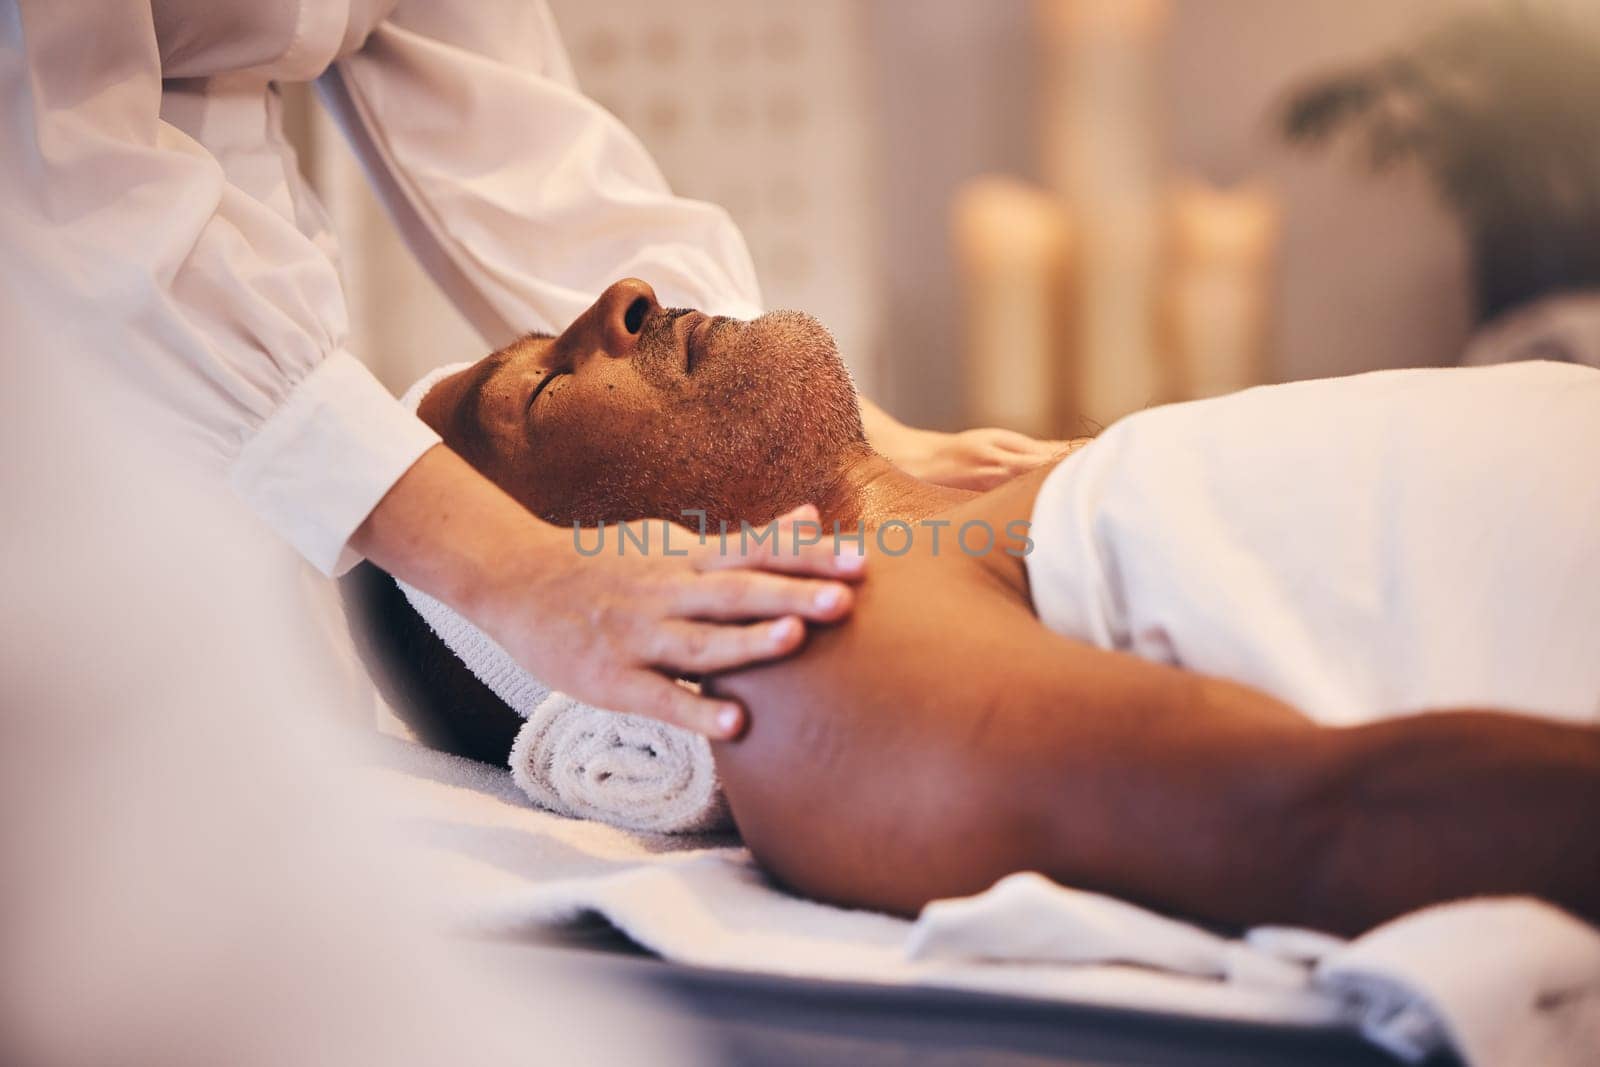 Spa, physiotherapy or hands massage old man to relax the body, mind or shoulders on a physical therapy table. Luxury, peace and zen masseuse helping a senior or elderly client with stress relief by YuriArcurs